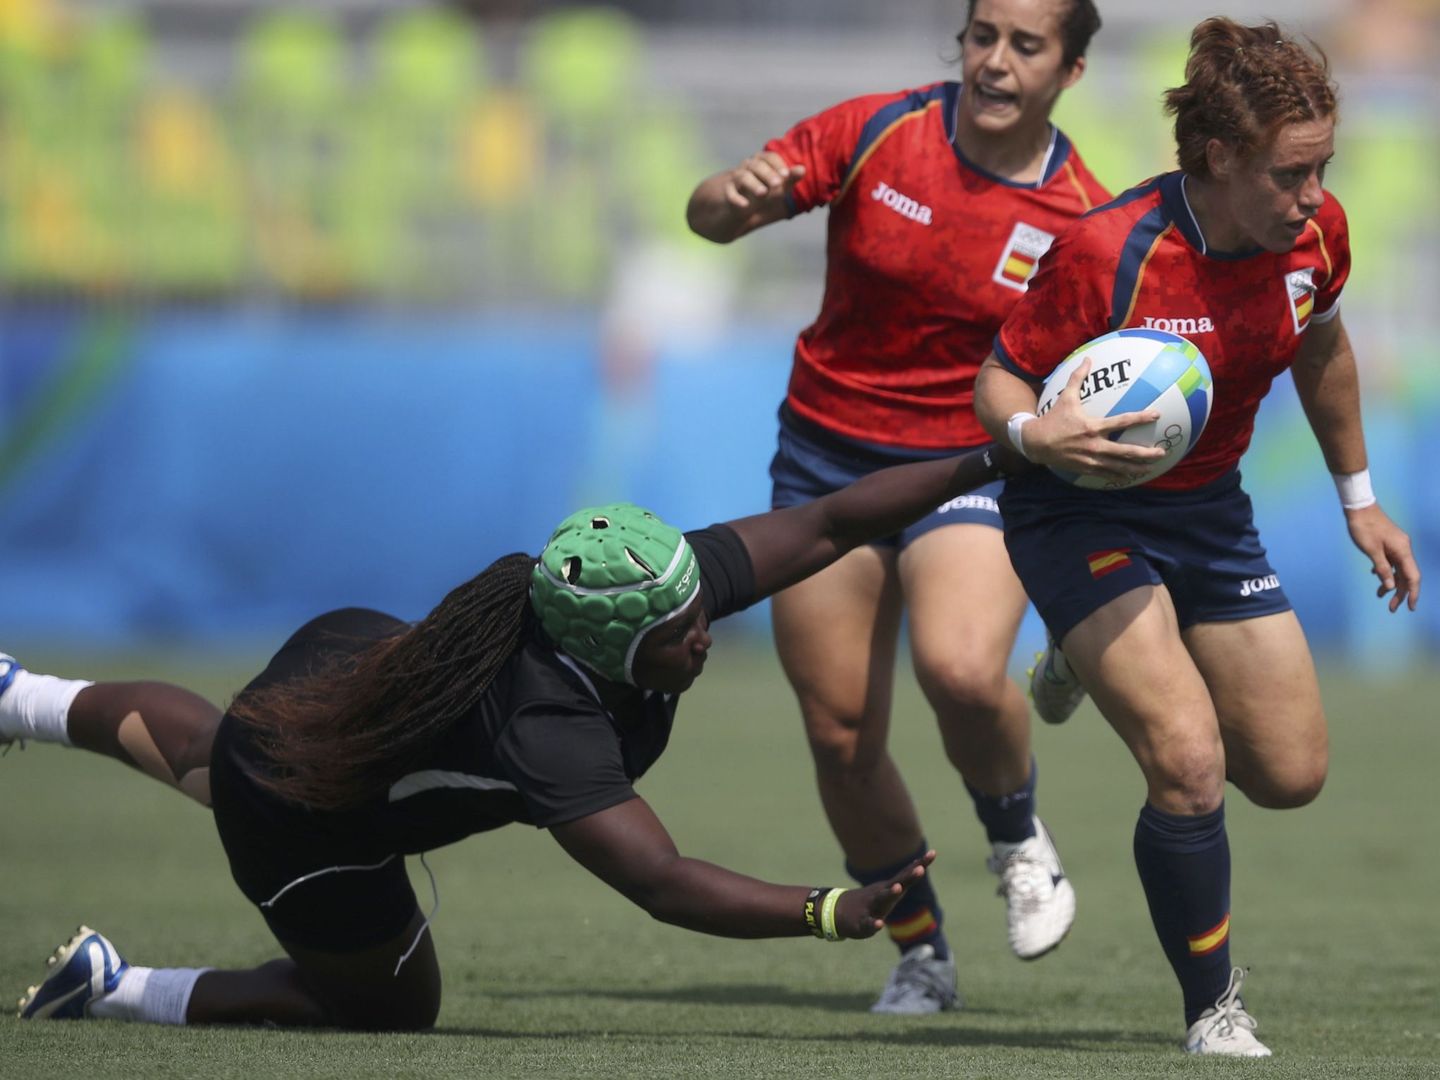 2016 Rio Olympics - Rugby - Preliminary - Women's Pool B Spain v Kenya - Deodoro Stadium - Rio de Janeiro, Brazil - 07 08 2016. Barbara Pla (ESP) of Spain is tackled by Philadelphia Olando (KEN) of Kenya.  REUTERS Phil Noble (BRAZIL  - Tags: SPORT OLYMPICS SPORT RUGBY) FOR EDITORIAL USE ONLY. NOT FOR SALE FOR MARKETING OR ADVERTISING CAMPAIGNS.